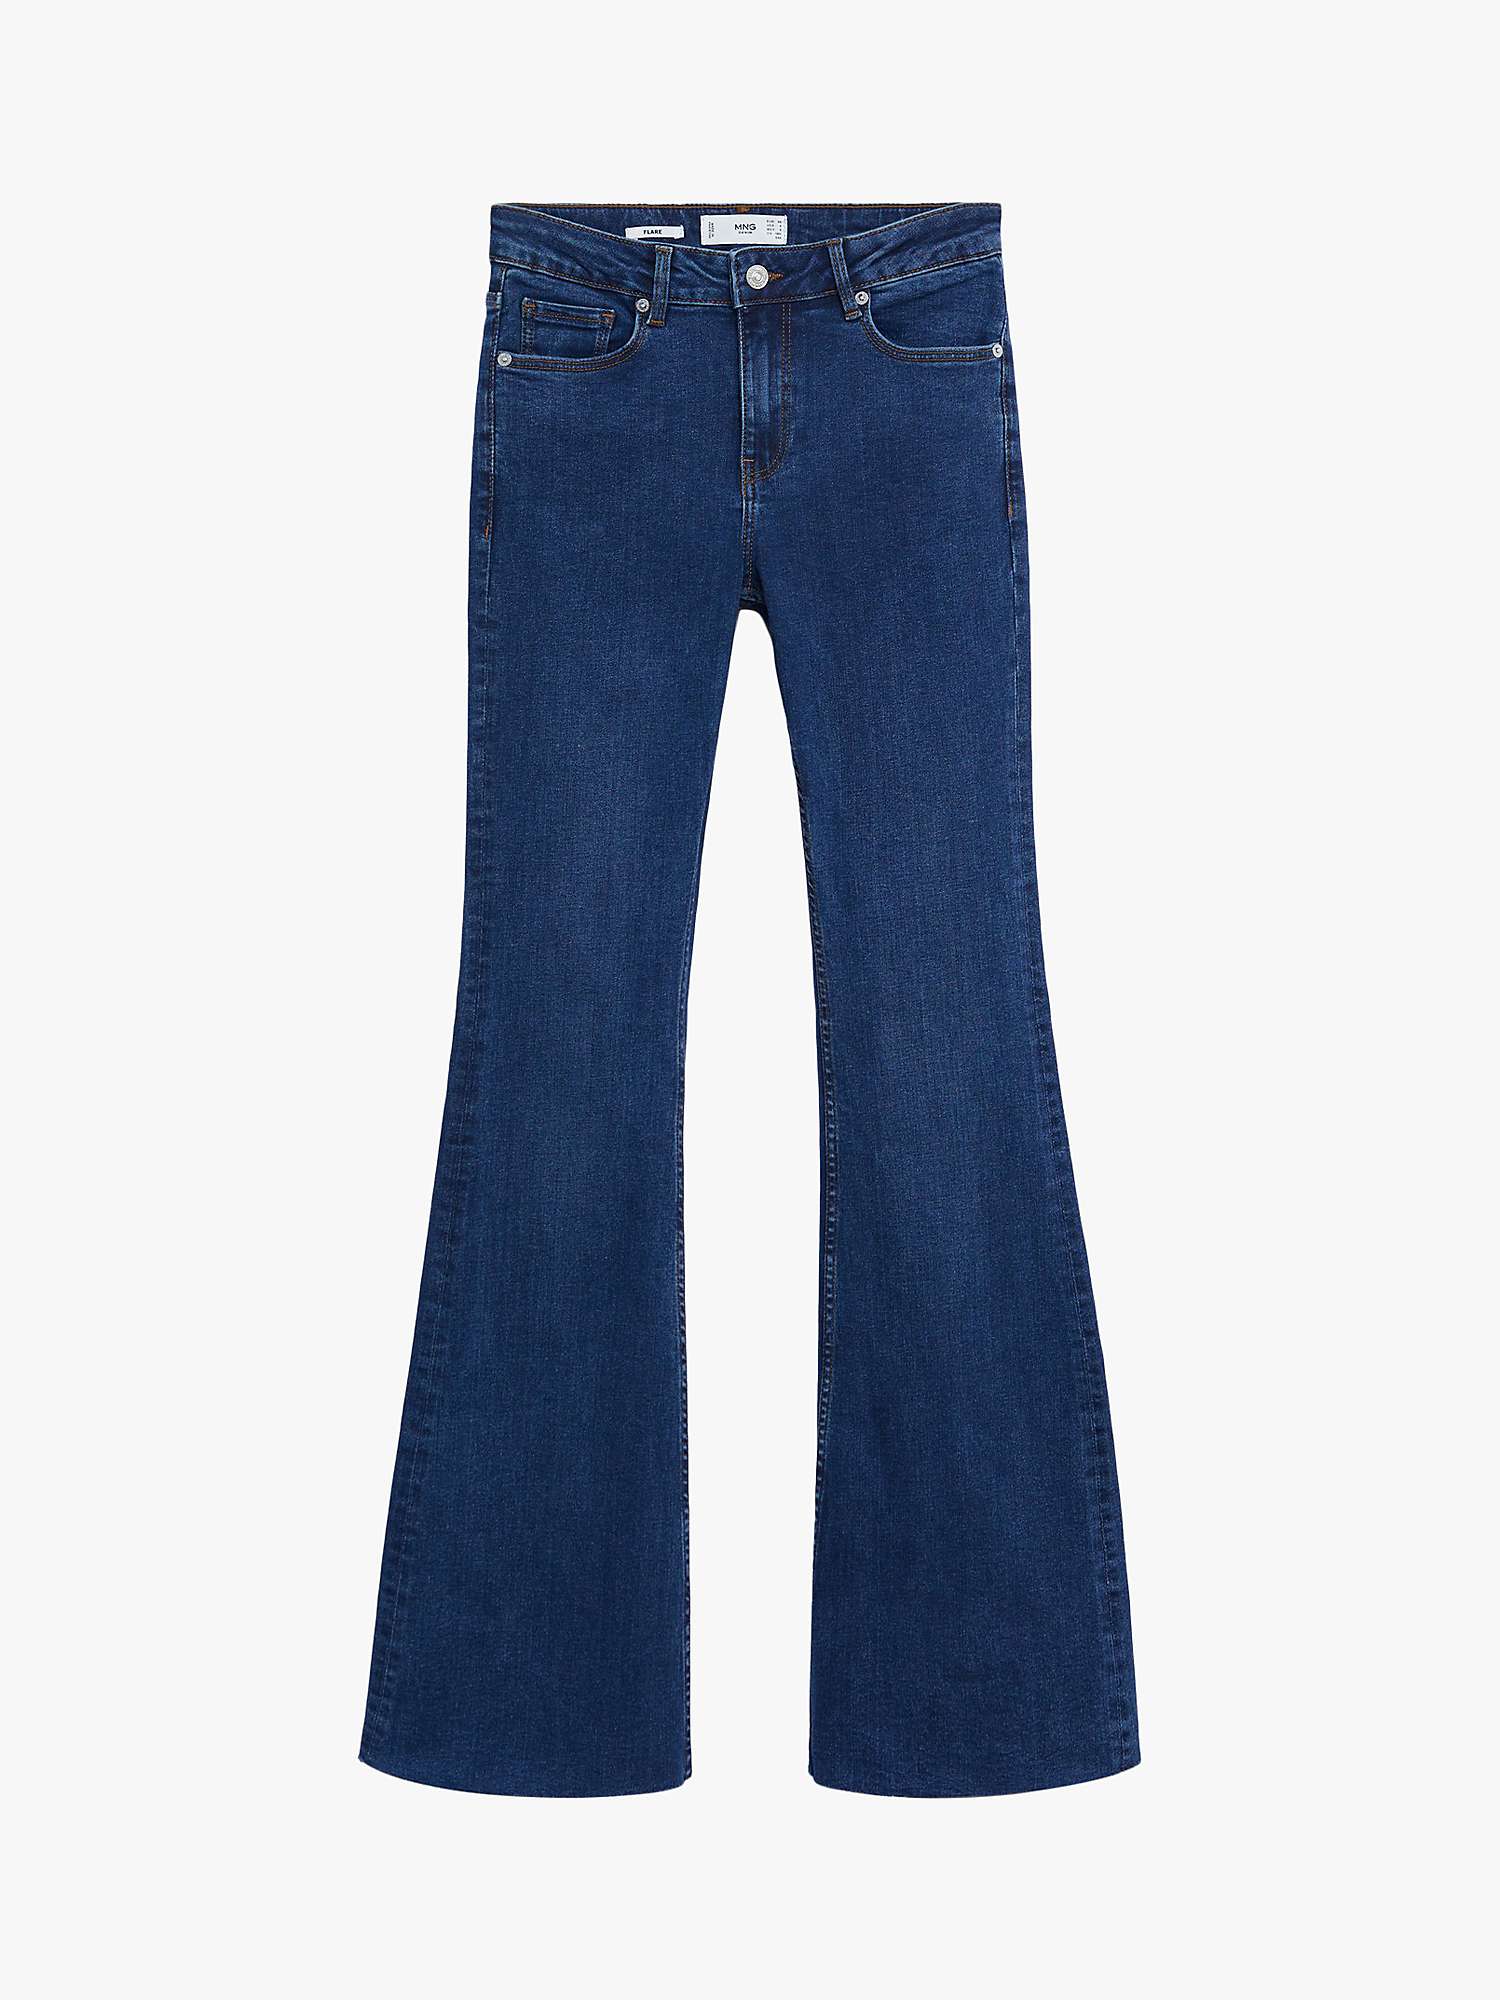 Mango Flared Jeans, Open Blue at John Lewis & Partners